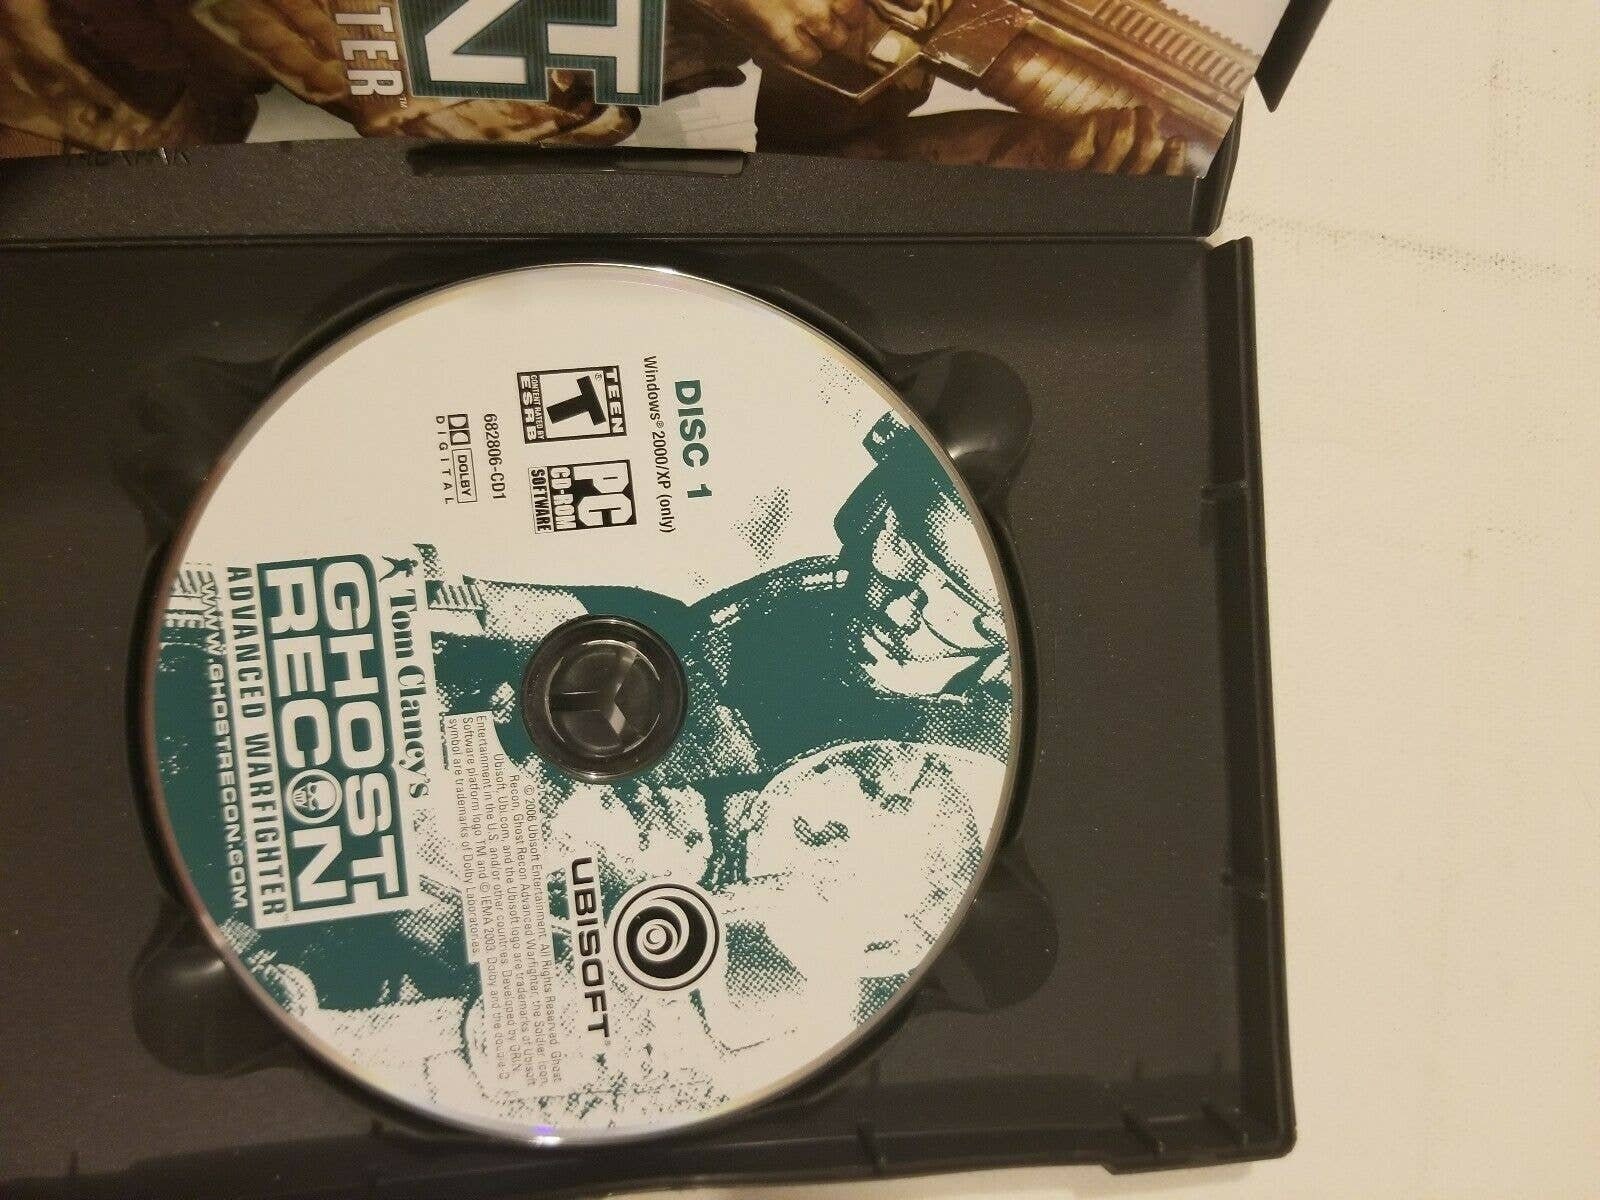 Tom Clancy's Ghost Recon: Advanced Warfighter - PC CD Rom Software  5031366017703